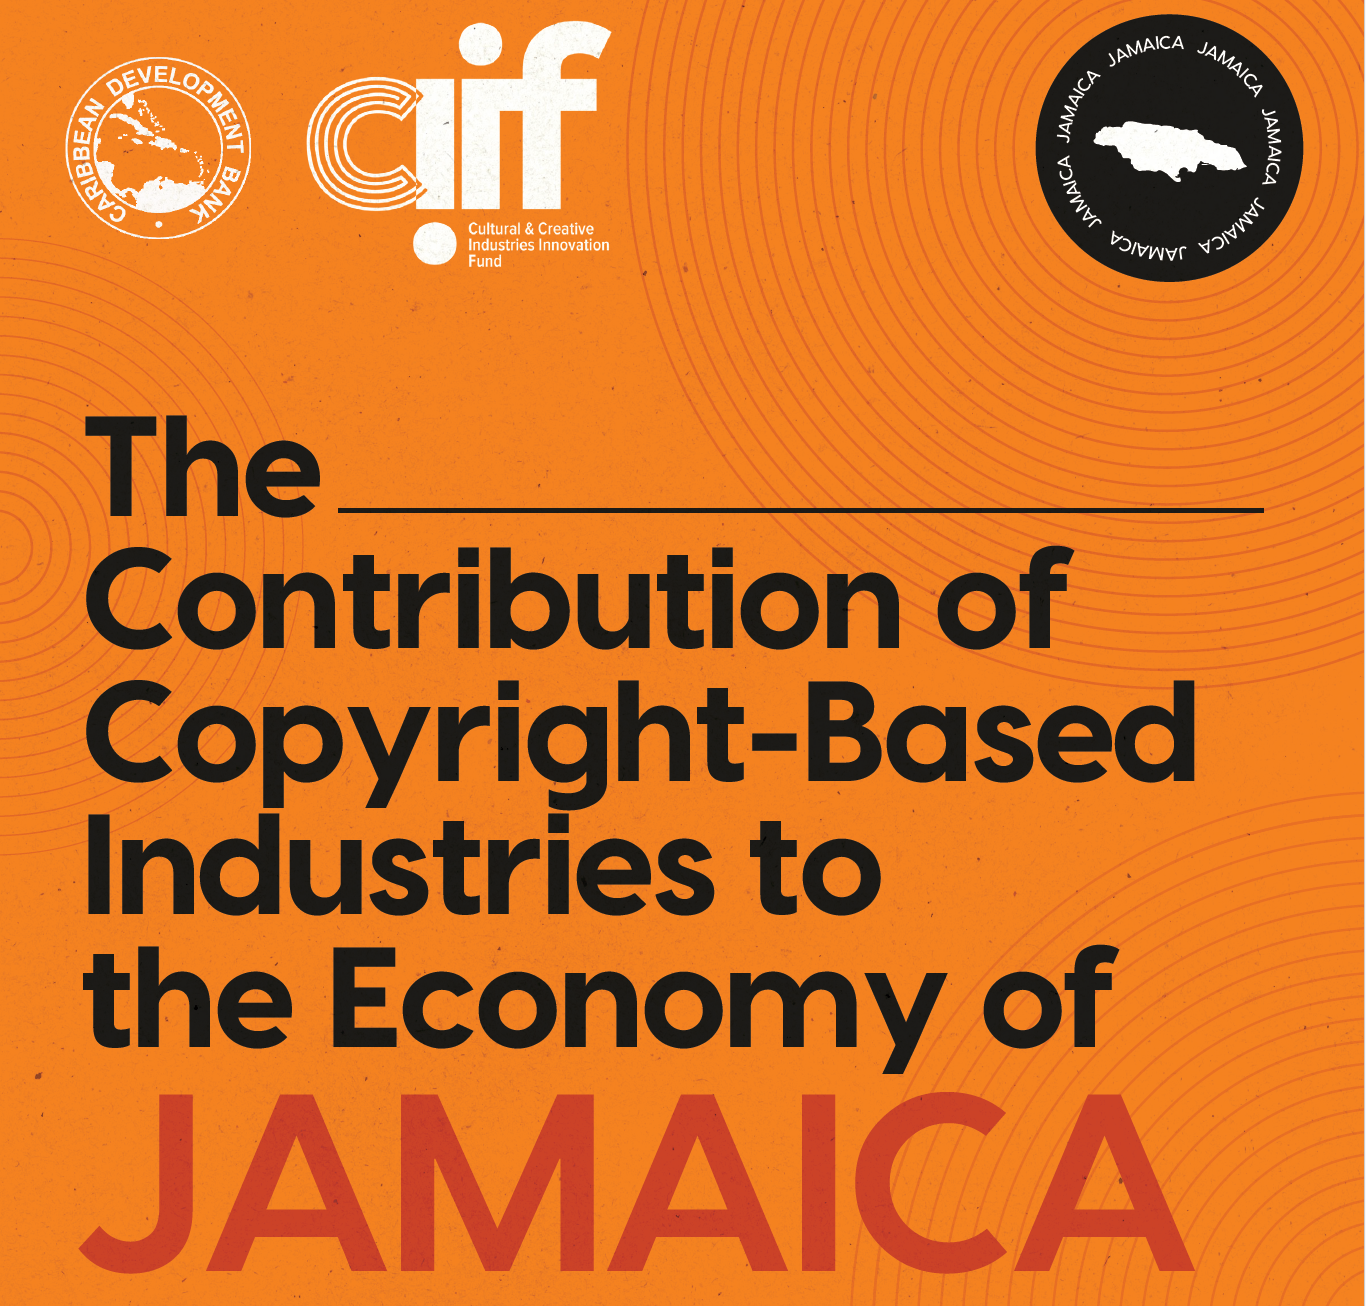 Orange cover of Jamaica study with title or publication in black